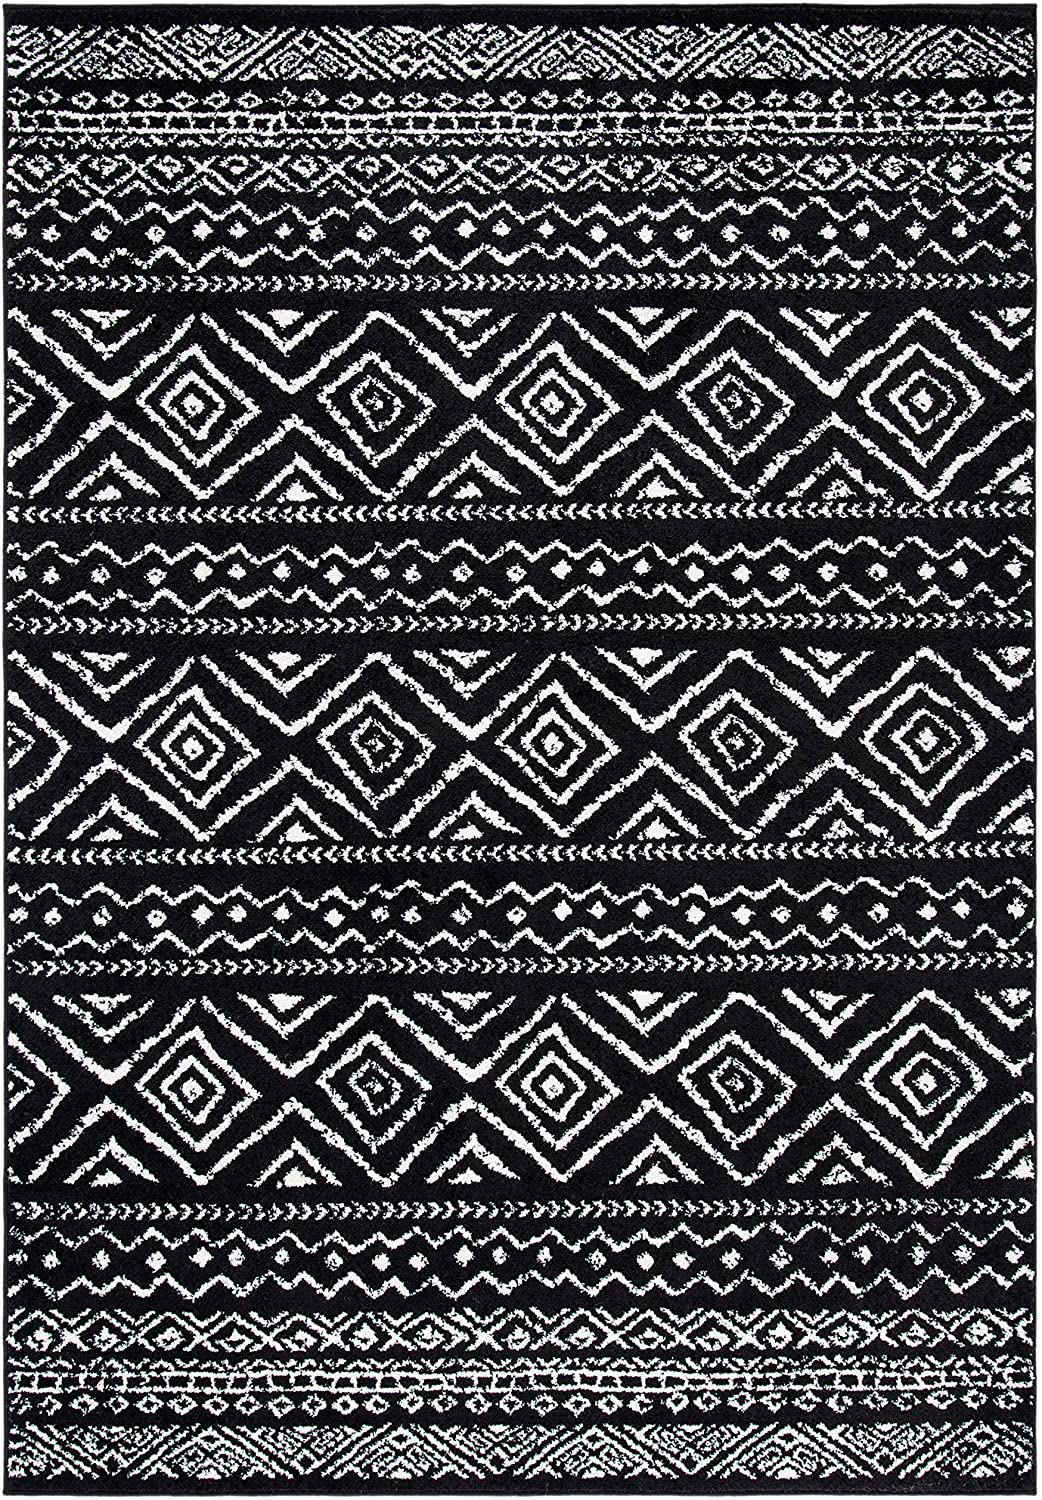 Safavieh Tulum Collection TUL267N Moroccan Boho Distressed Non-Shedding Living Room Bedroom Dining Home Office Area Rug, 5'3" x 7'6", Navy / Ivory